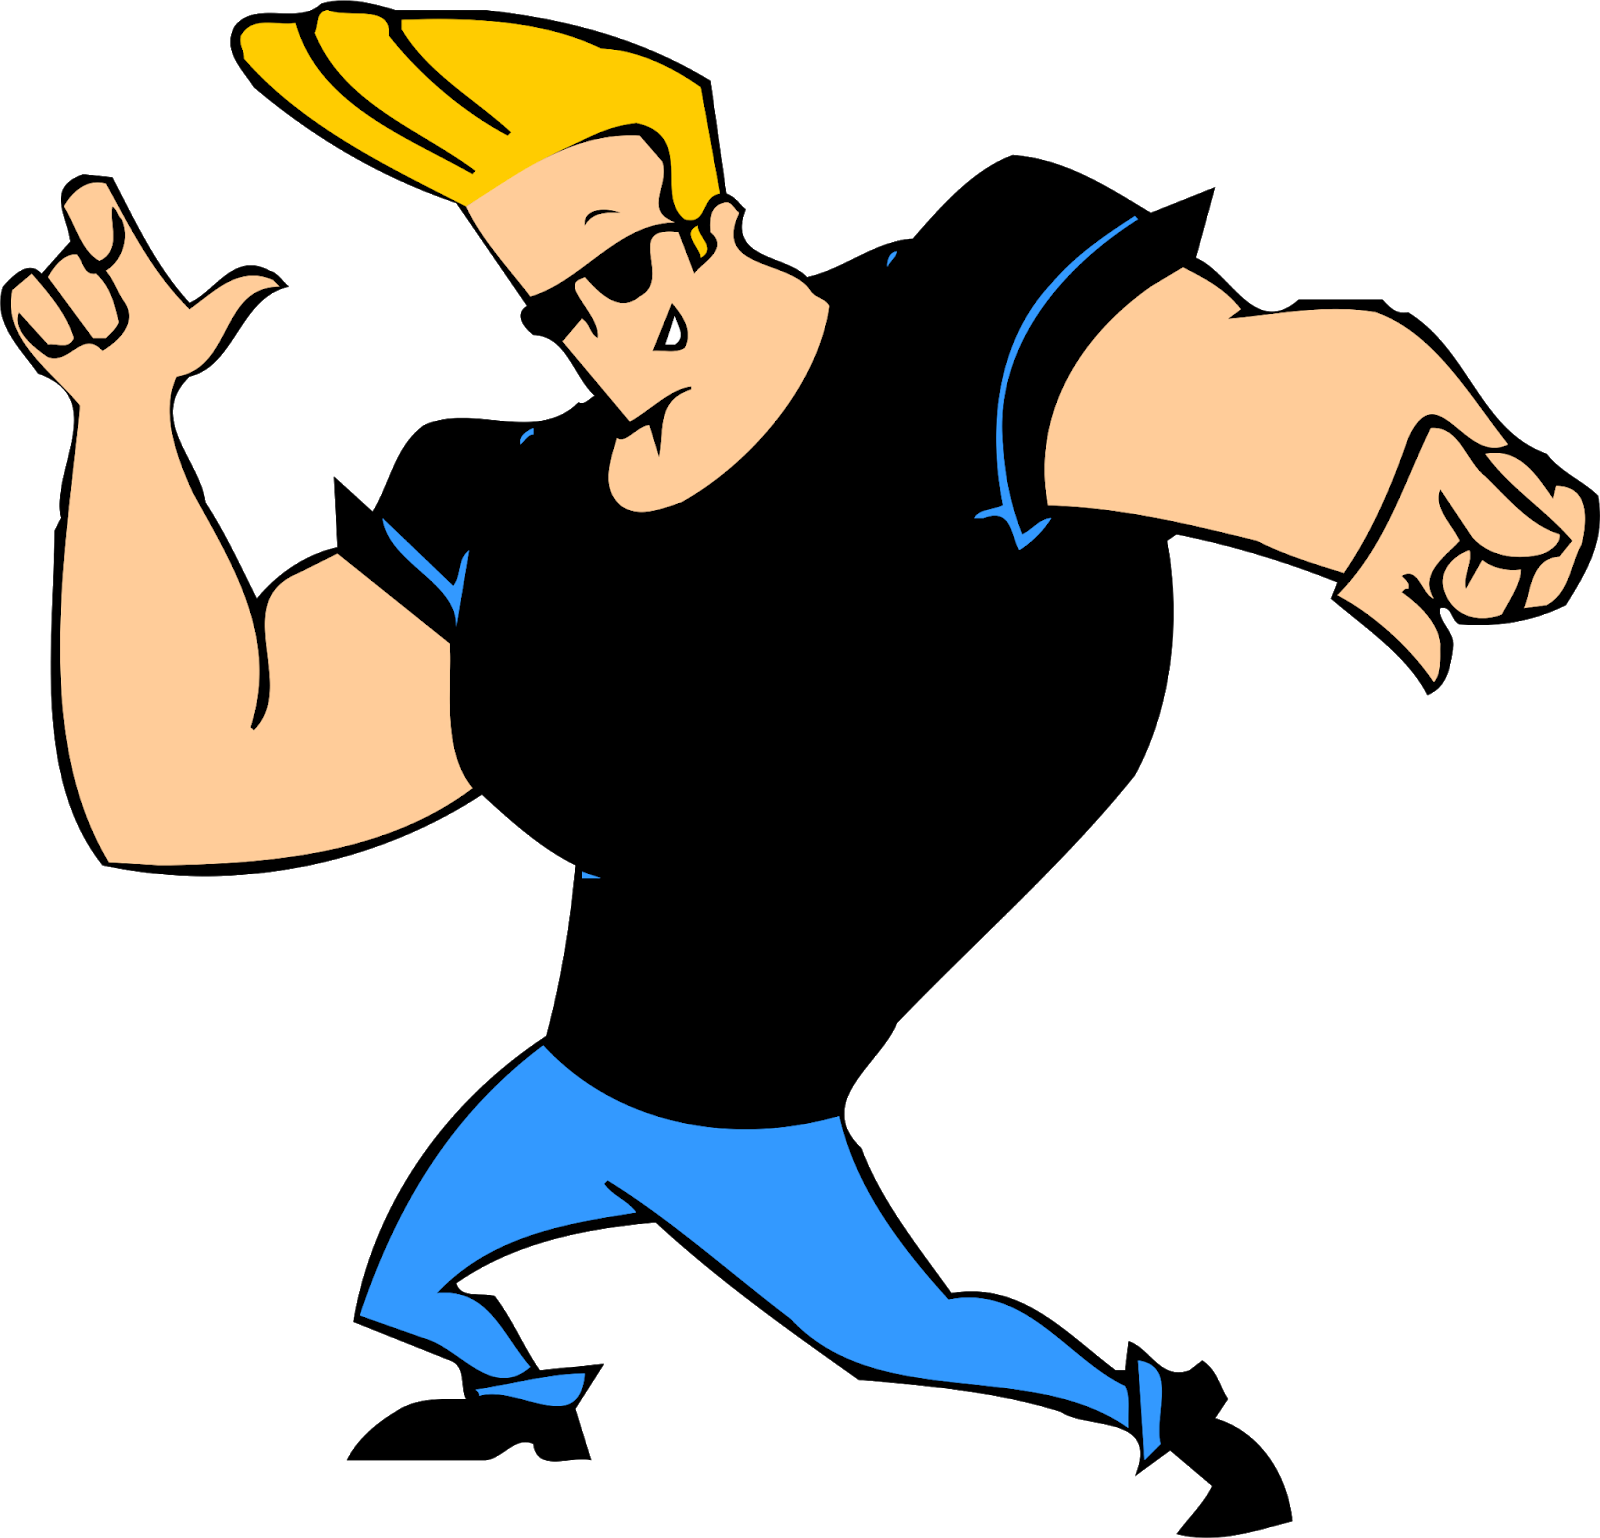 Johnny Bravo PNG Images Transparent Background | PNG Play - Part 2